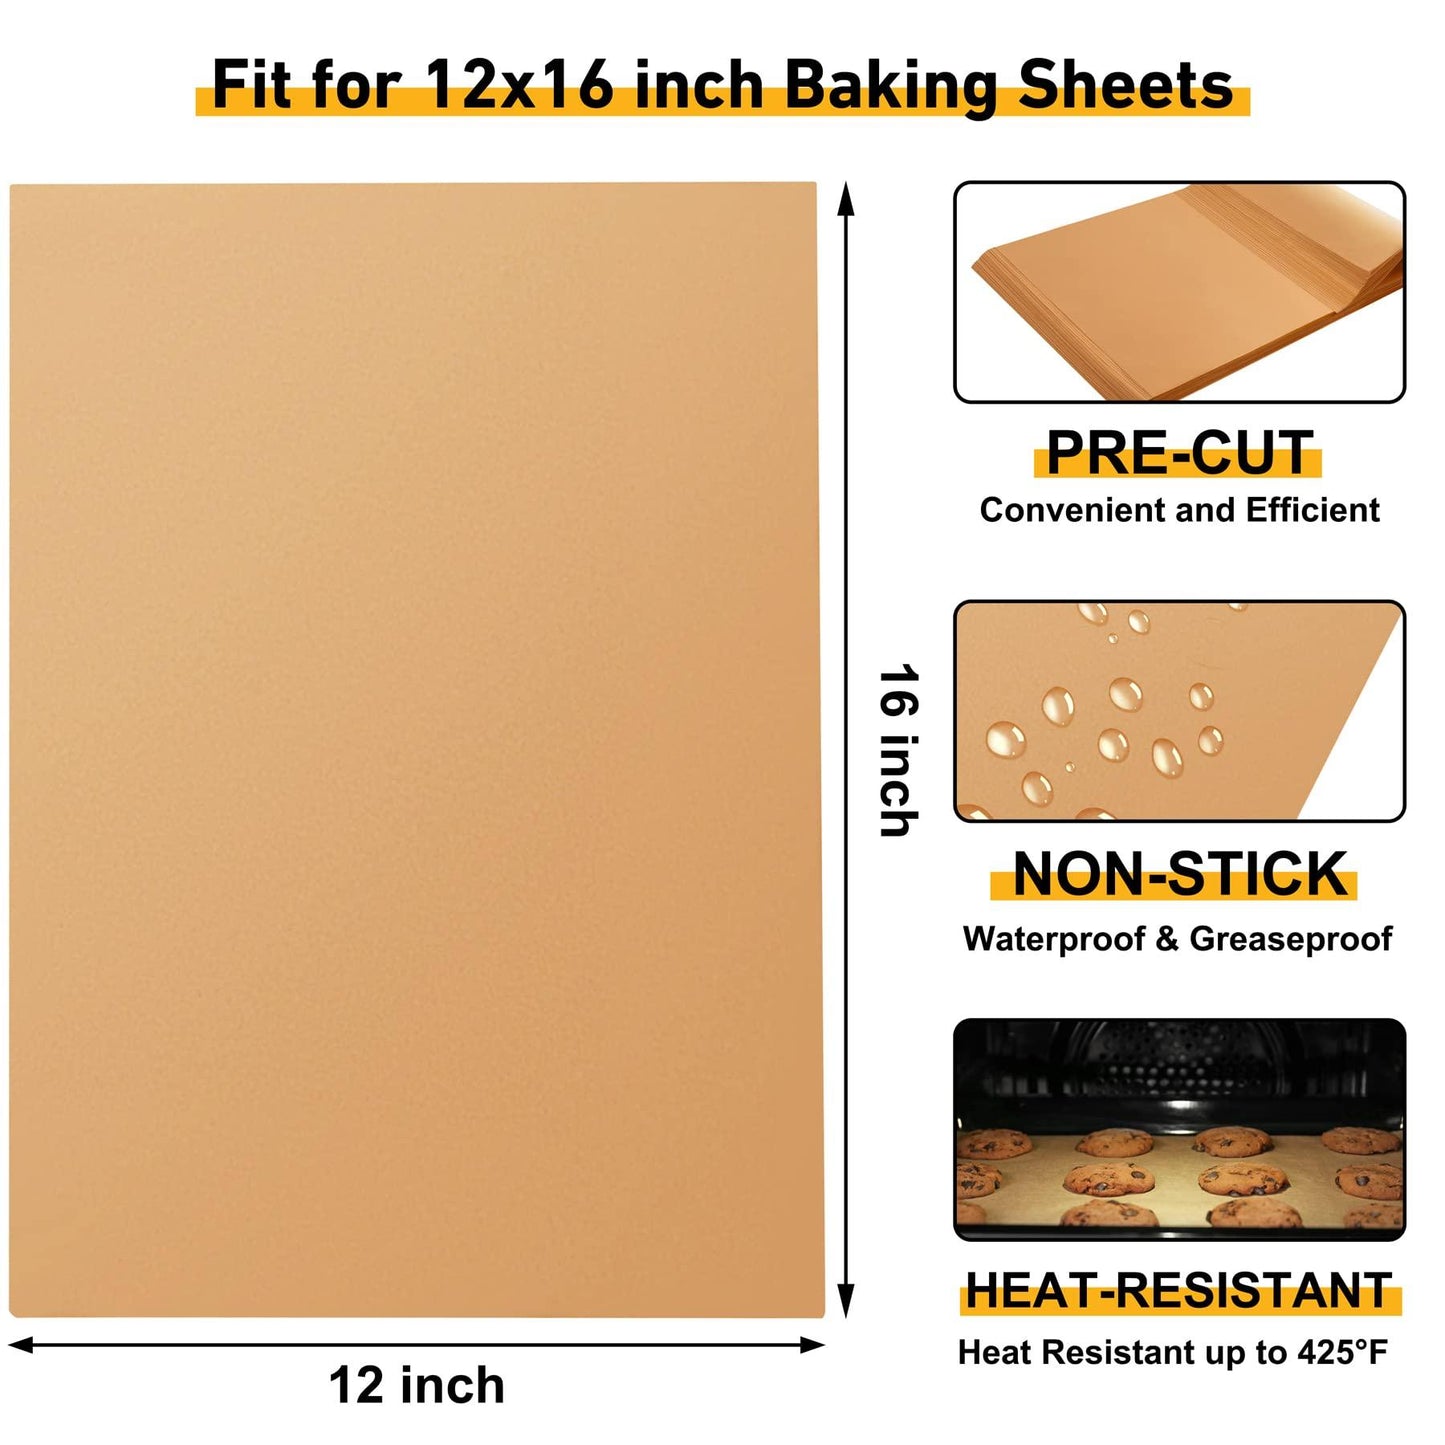 200 Pcs Parchment Paper Sheets, 12 x 16 Inches Air Fryer Disposable Paper Liners, Non-Stick Precut Parchment Paper for Baking, HOFHTD Unbleached Baking Papers for Cooking, Grilling, Roasting, Steaming - CookCave